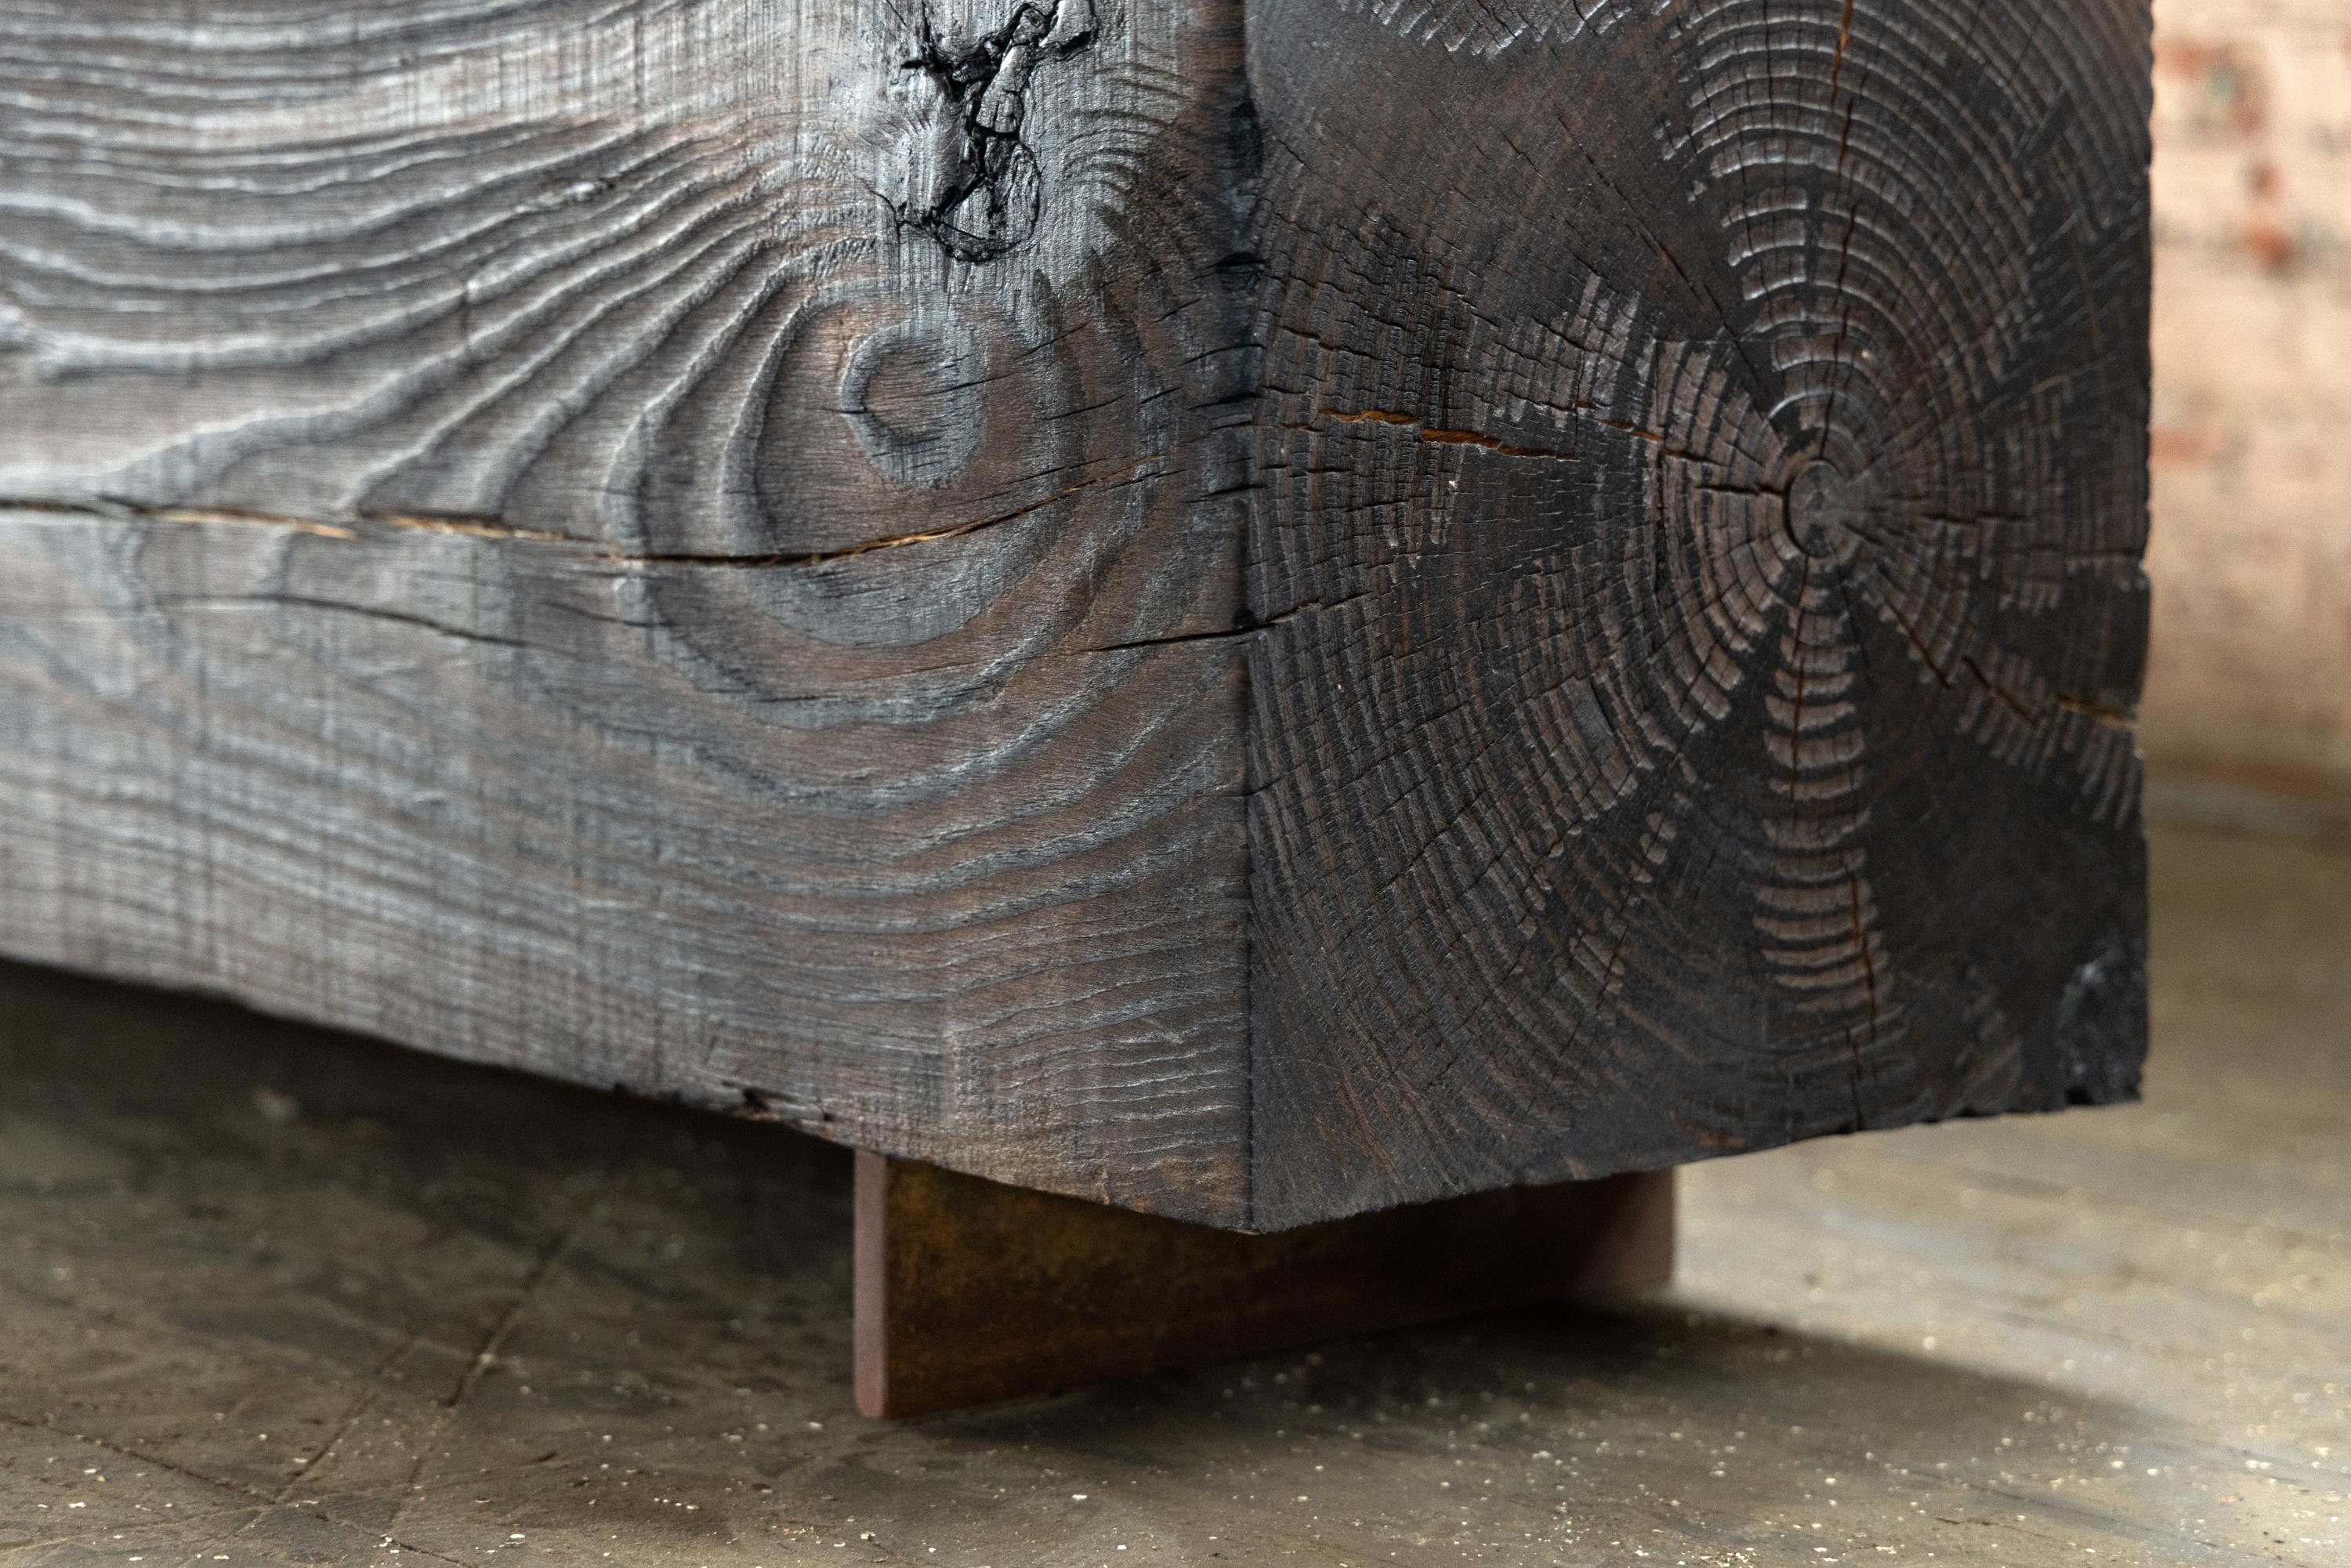 Our beam bench utilizes urban, local pine logs for a solid volume bench for indoors or outdoors. Narrow and backless, the simple lines express the graphic texture of the end grain of each log. The 15